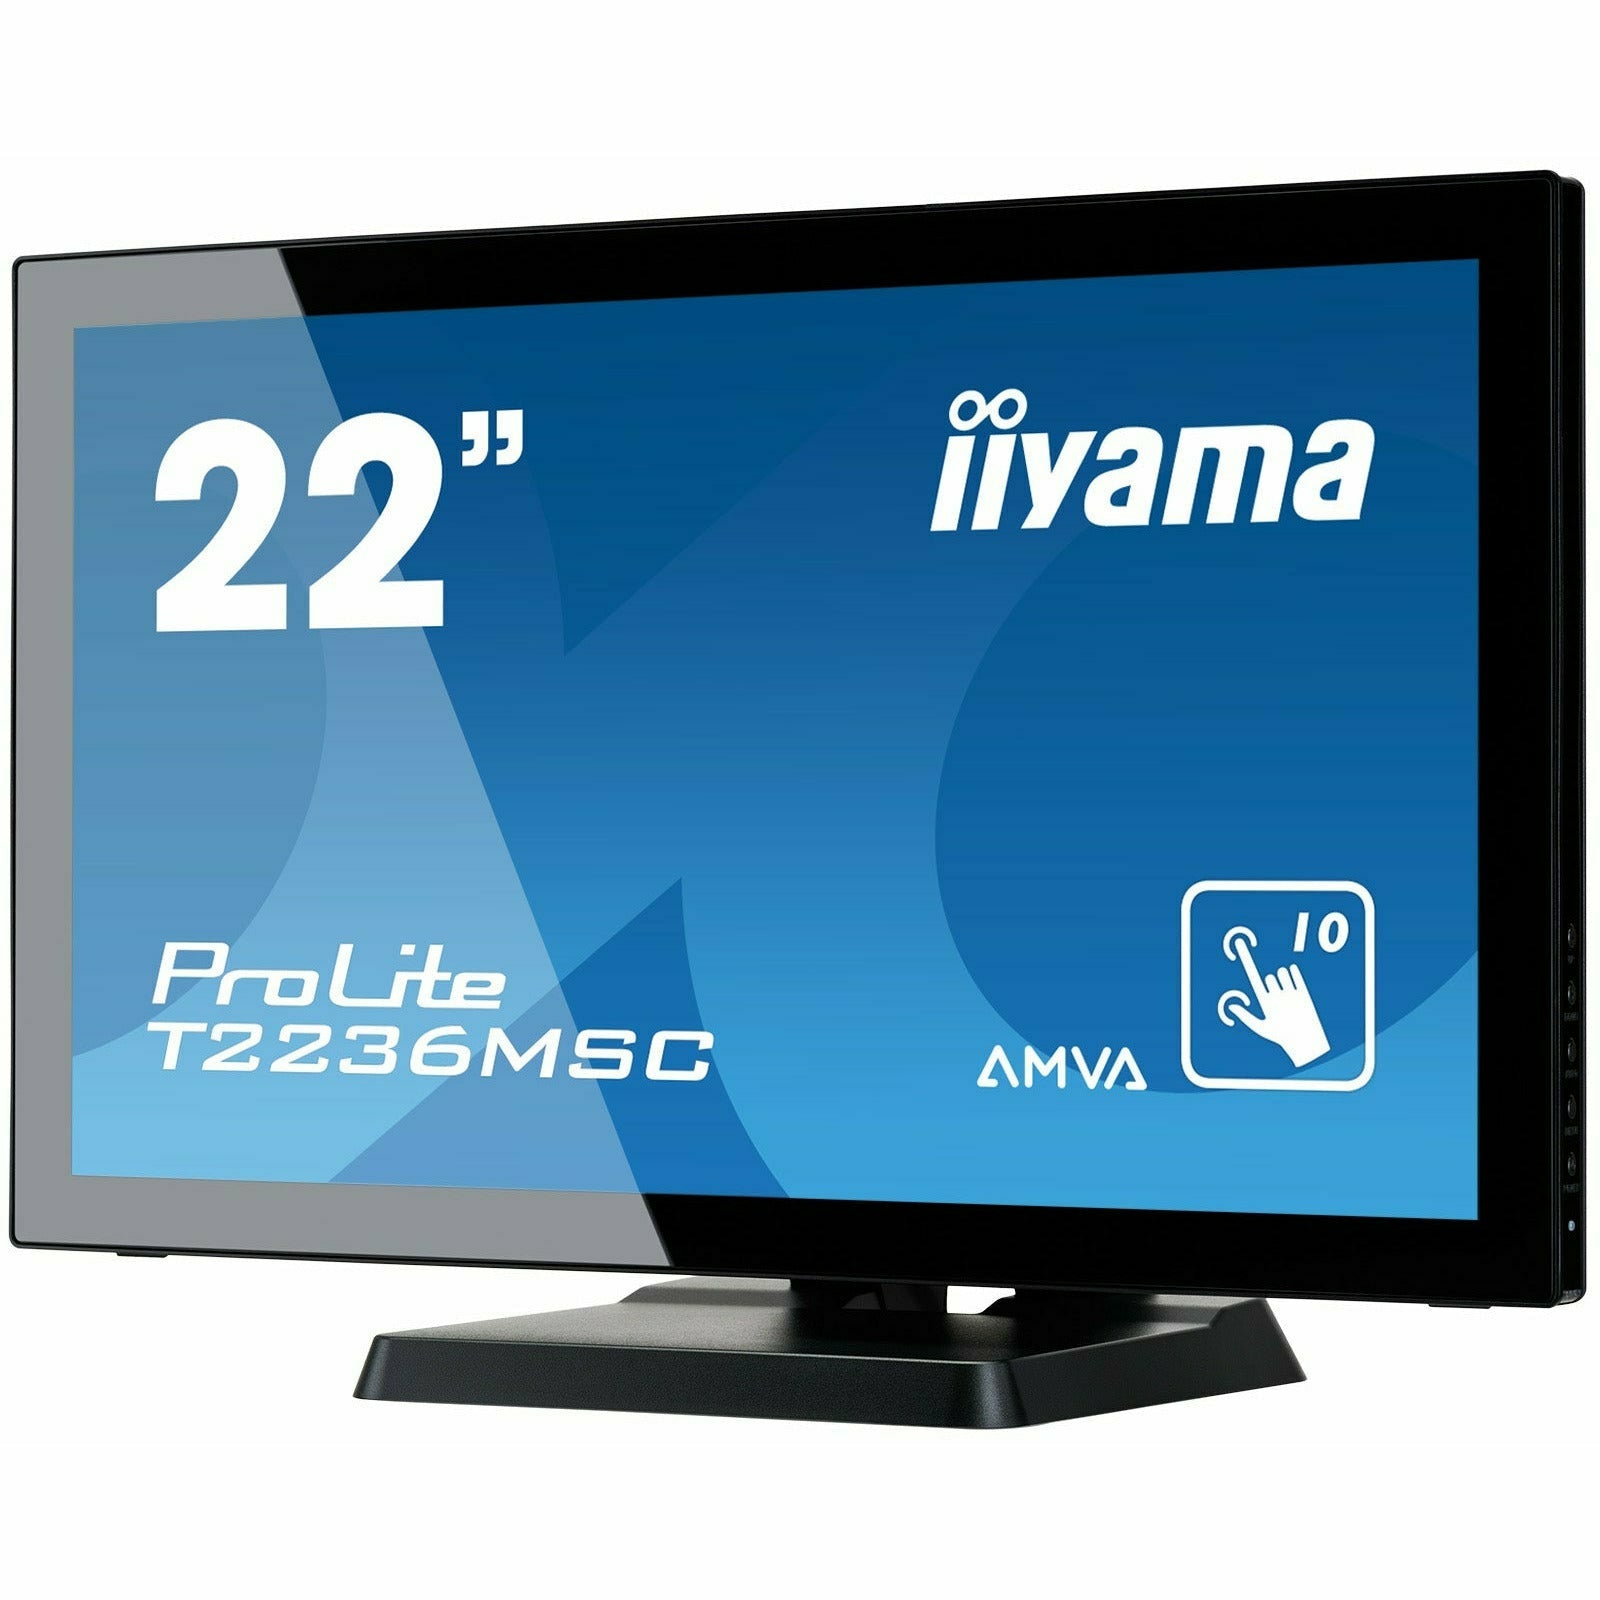 Steel Blue iiyama ProLite T2236MSC-B2 22" 10 point Touch Screen with edge-to-edge glass and AMVA panel